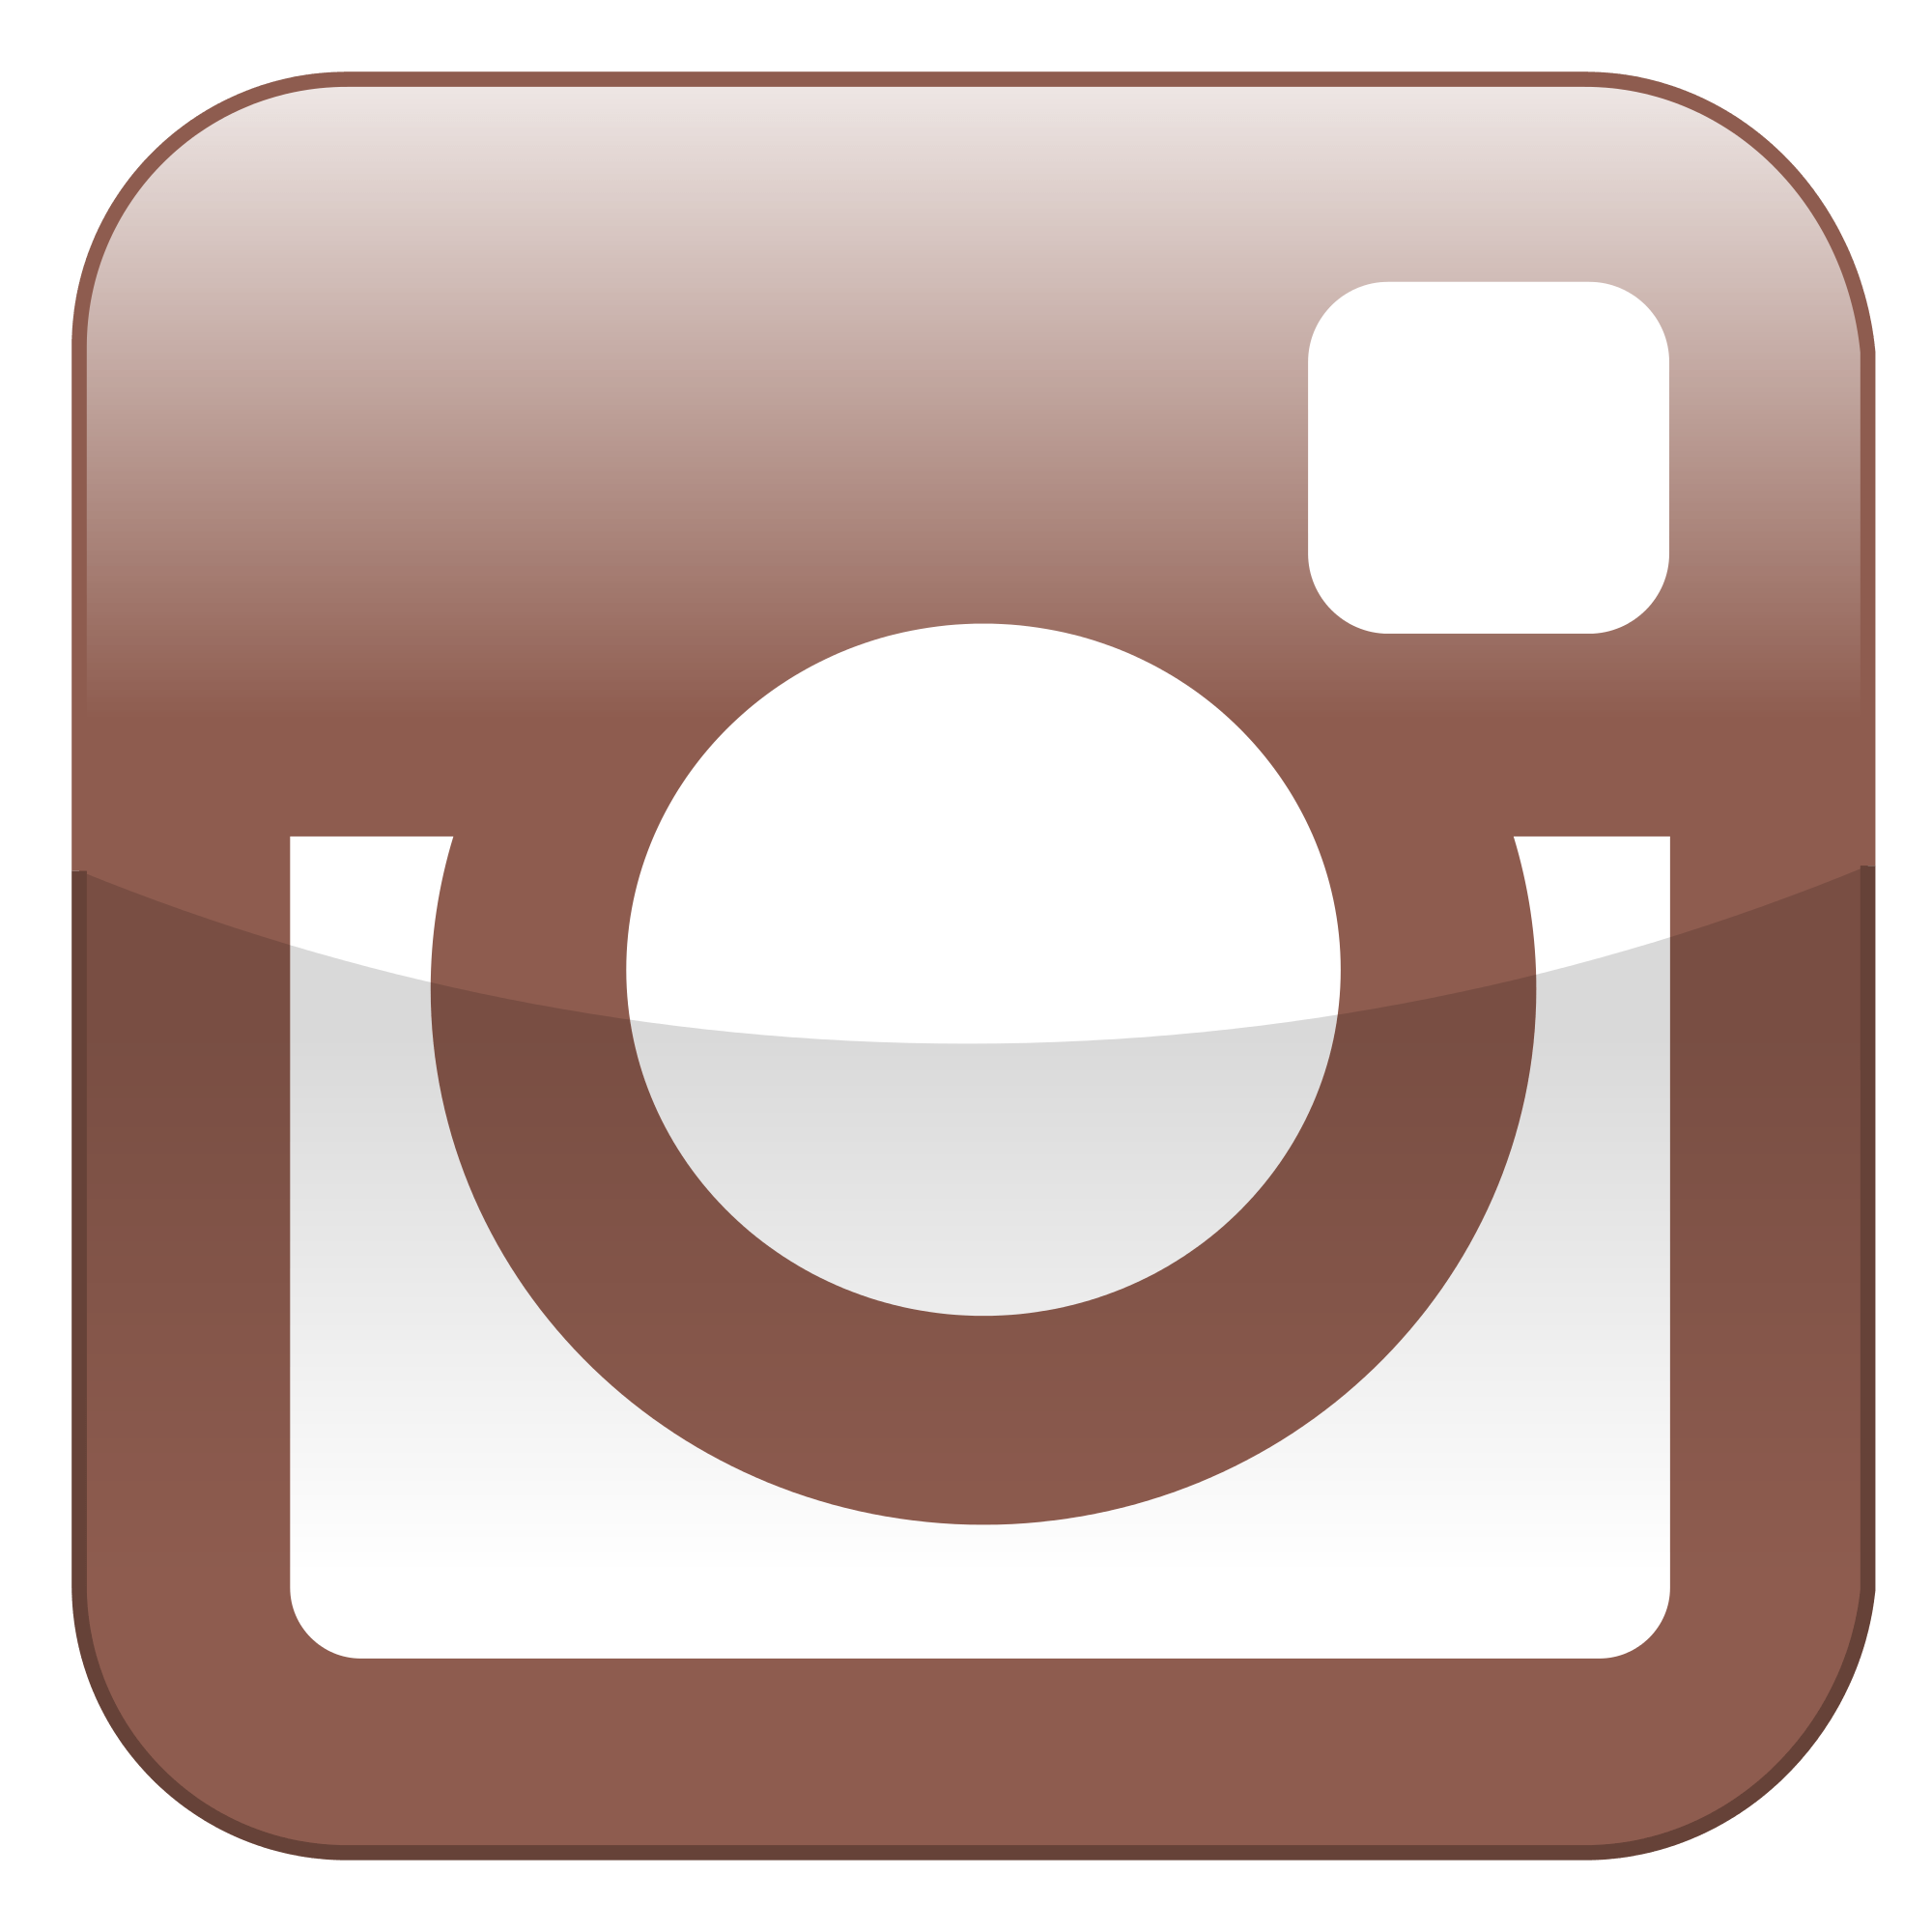 Real Instagram Logo - Buy instagram likes, real, automatic. Buysocial.pro